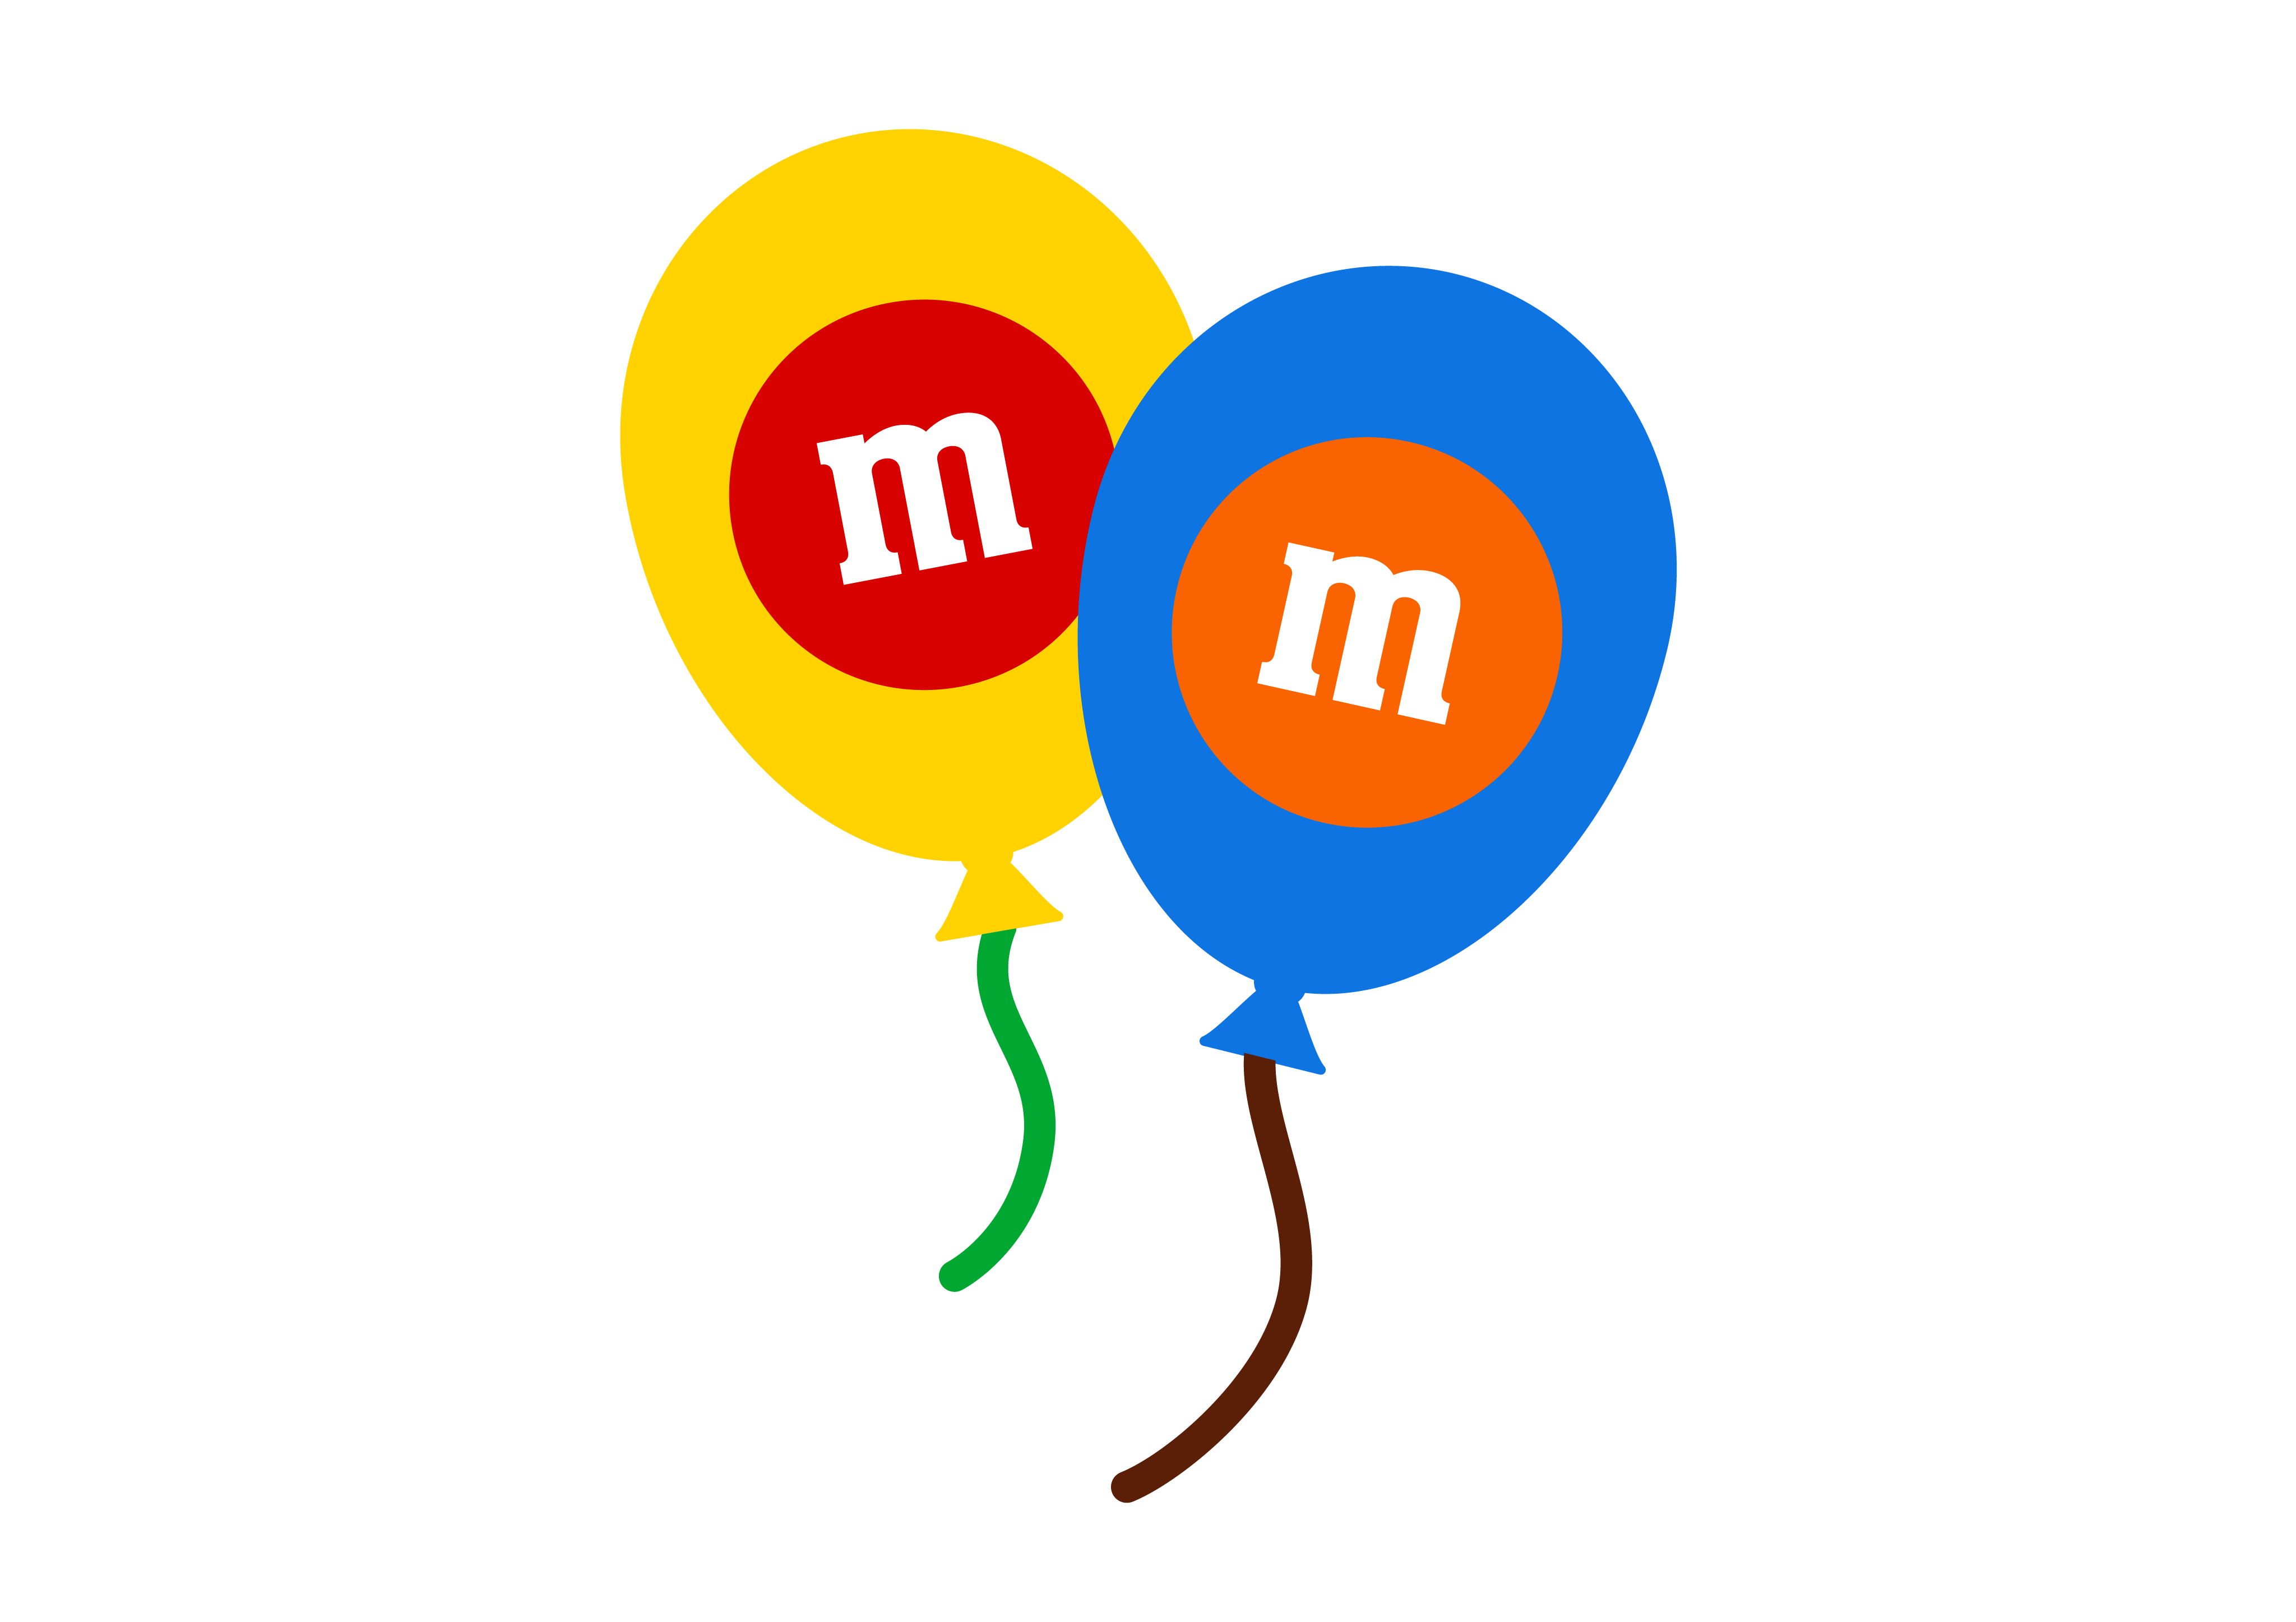 Explore our M&M's Peanut, Crunchy & Chocolate Mix Big Family Share Bag 400g  M&M's collection. Get them now